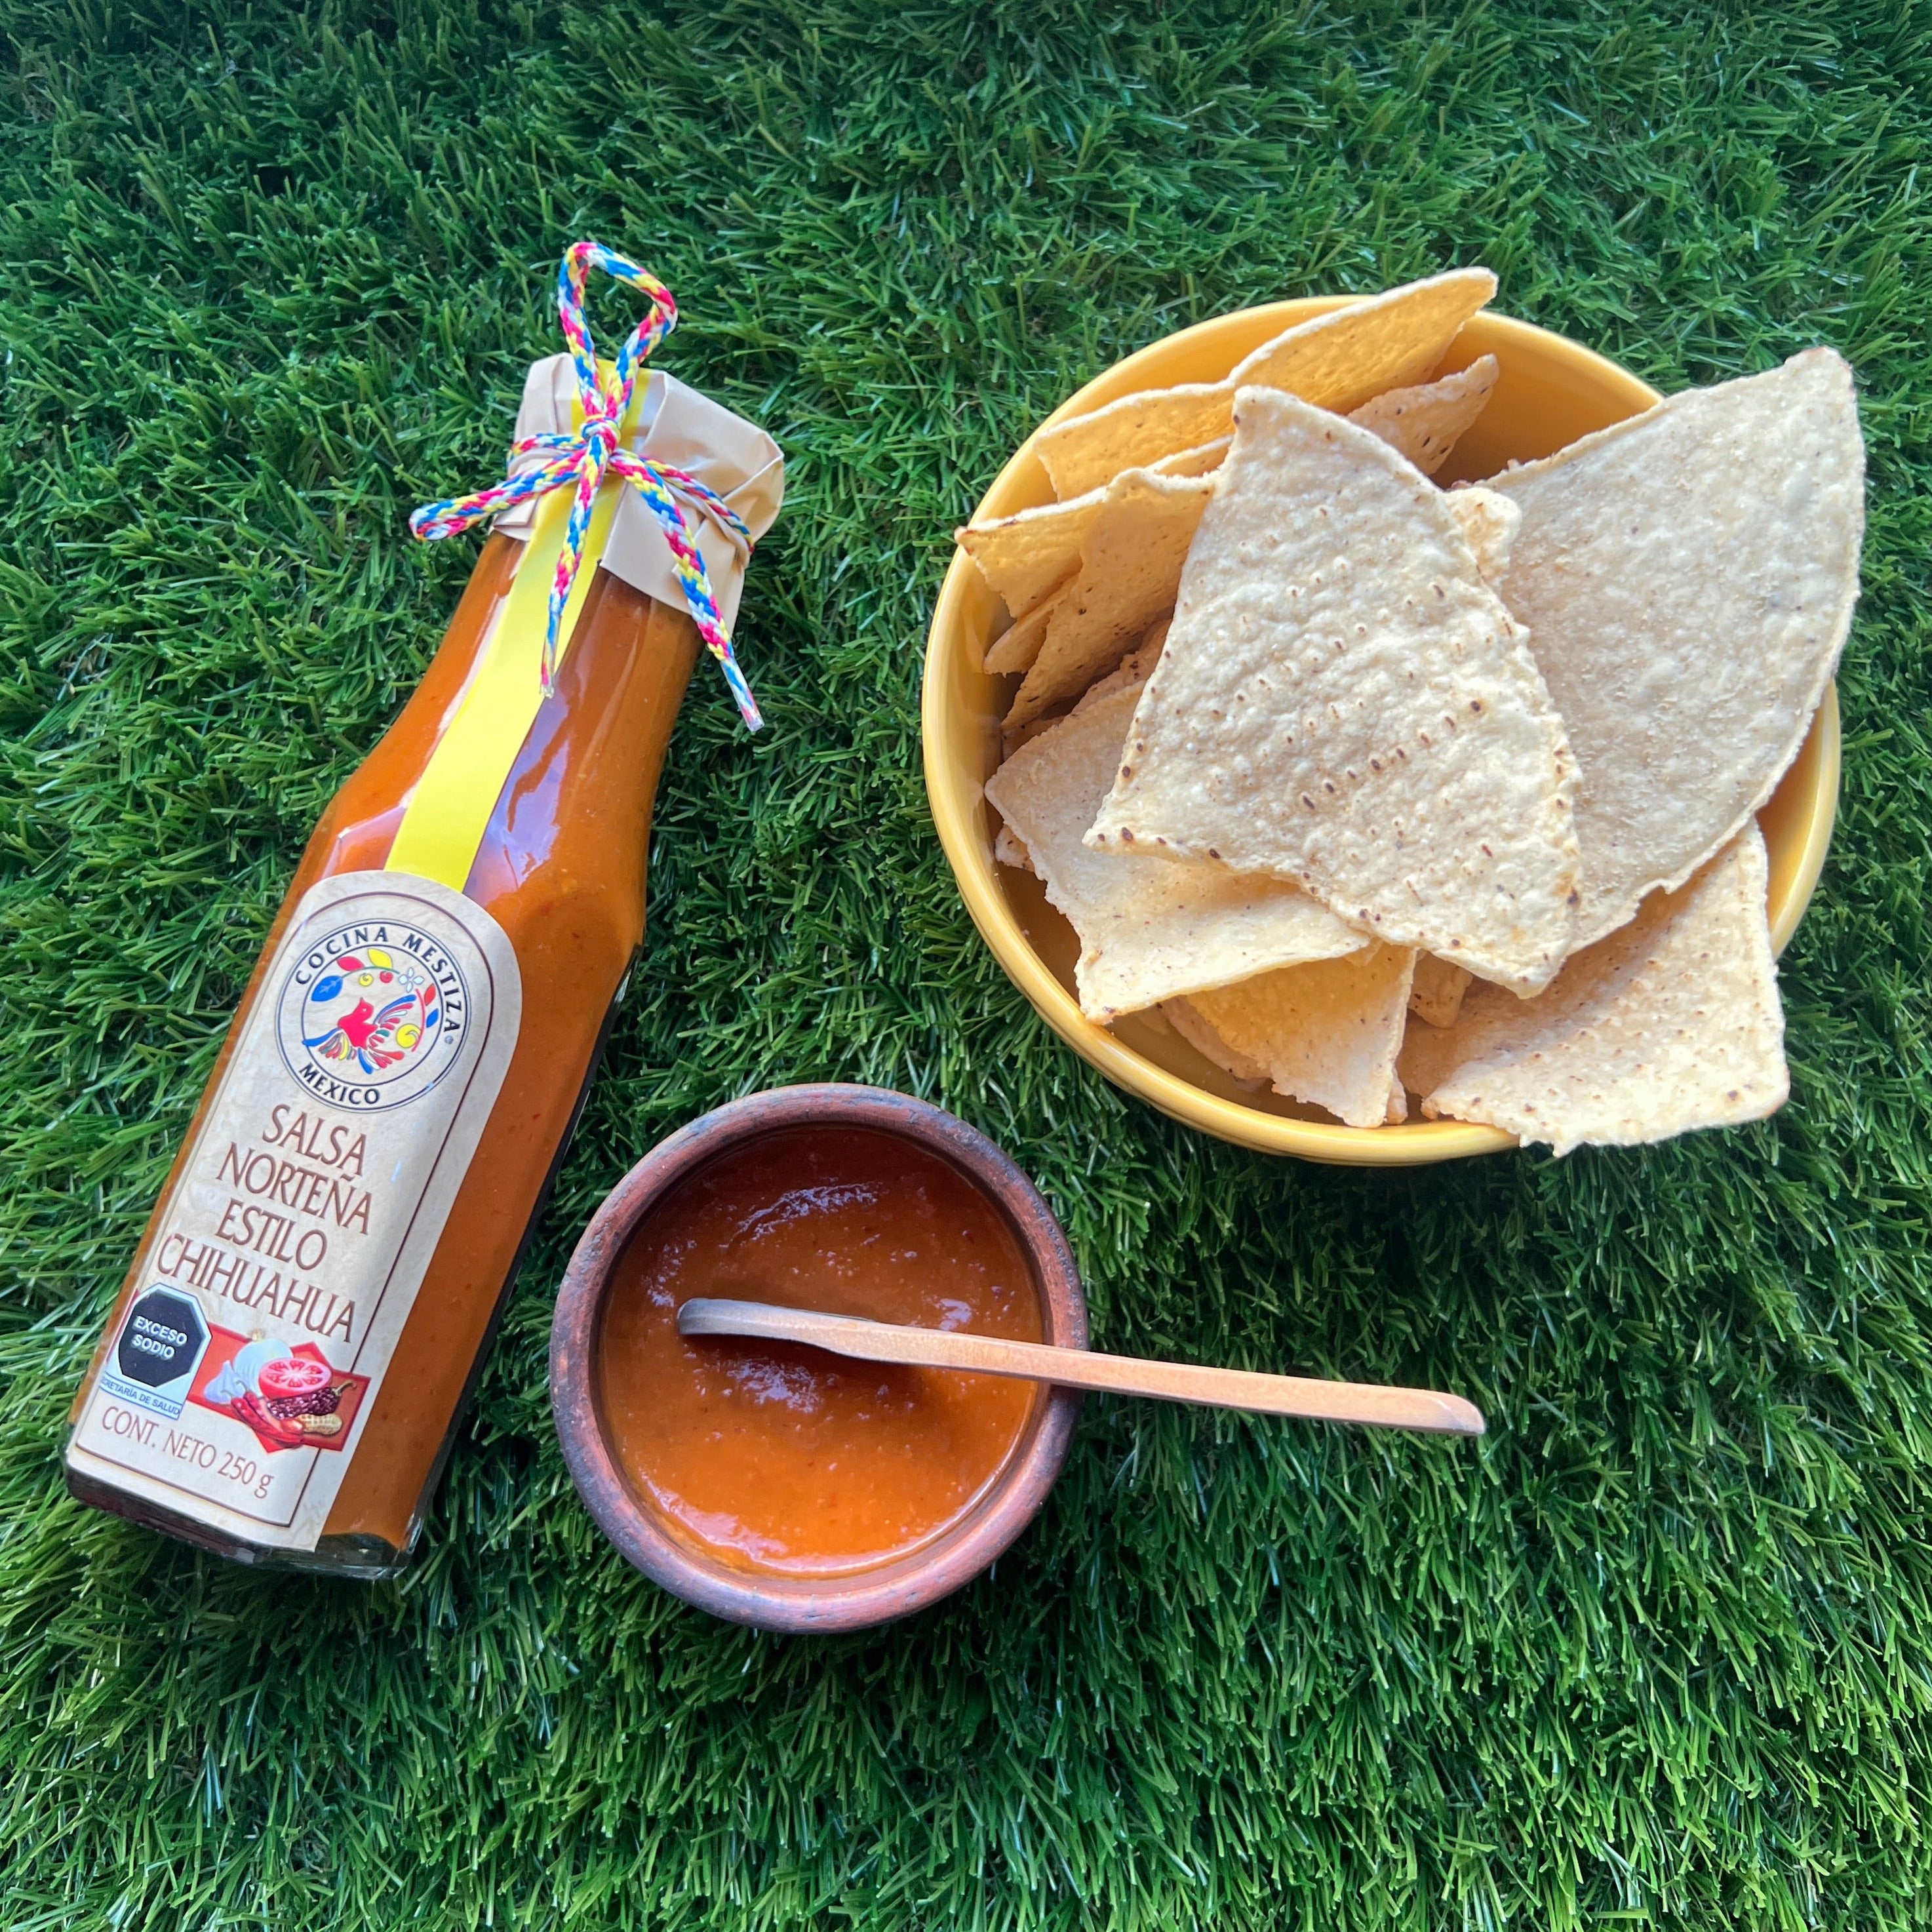 a bottle of Salsa Nortena Chihuahua Style laying on grass with a bowl of Charra Tortilla Chips Original and some of the salsa in a small bowl with a wooden spoon